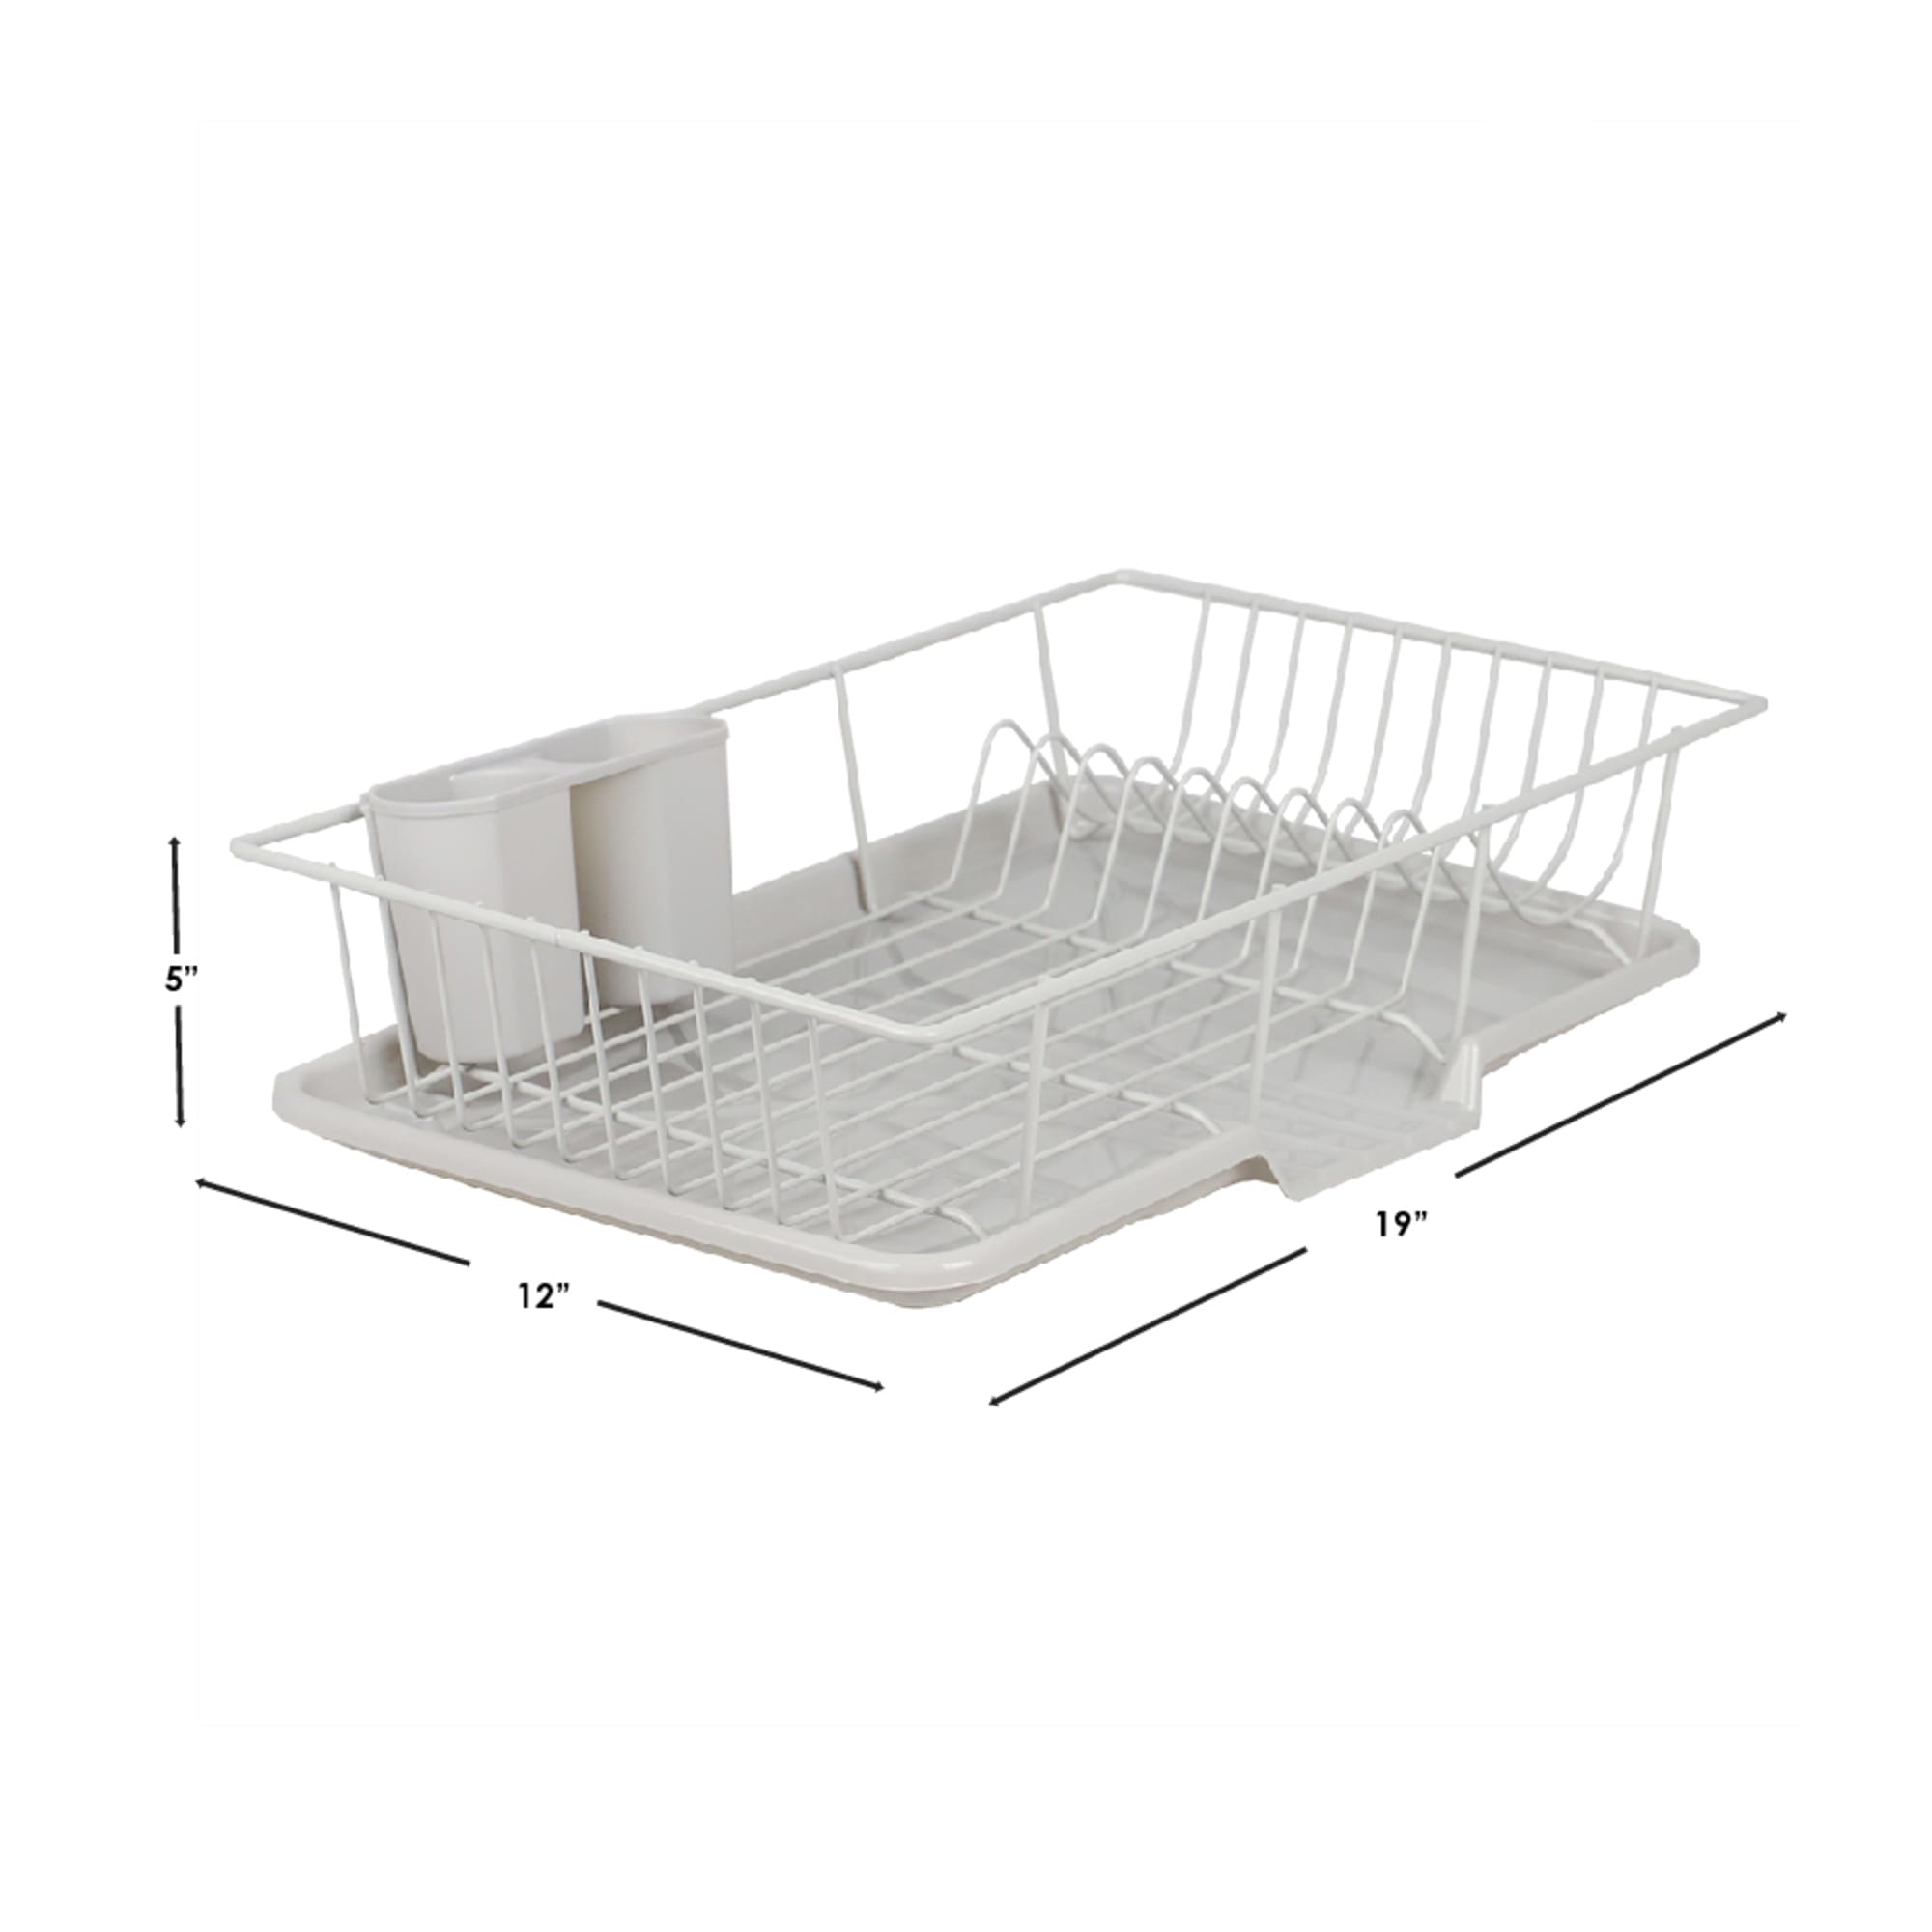 3-Piece Dish Drainer Set | Sweet Home Collection